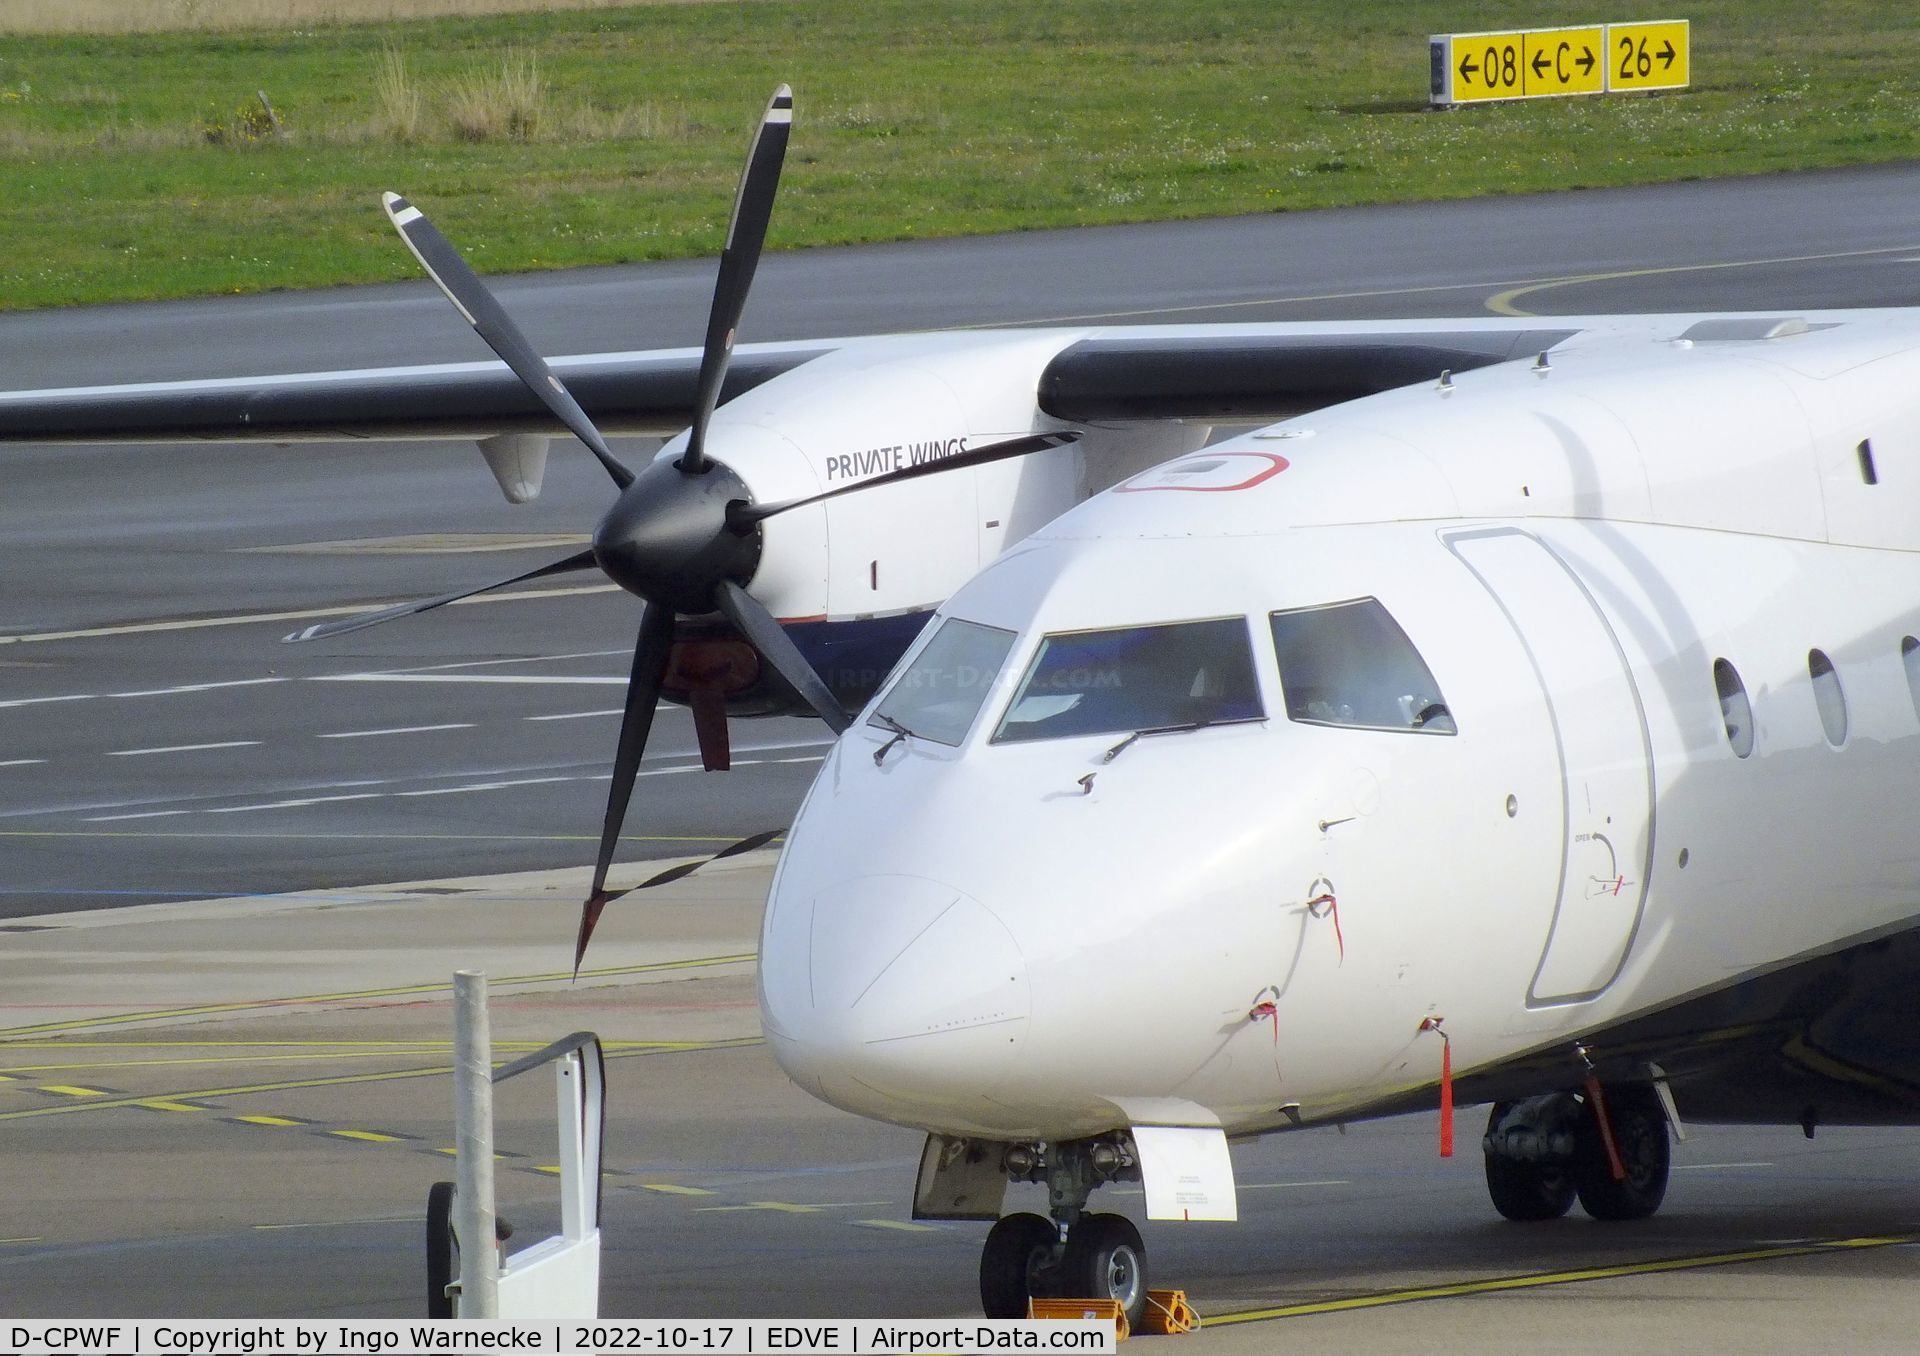 D-CPWF, 1999 Dornier 328-110 C/N 3112, Dornier 328-110 of Private Wings at Braunschweig-Wolfsburg airport, BS/Waggum